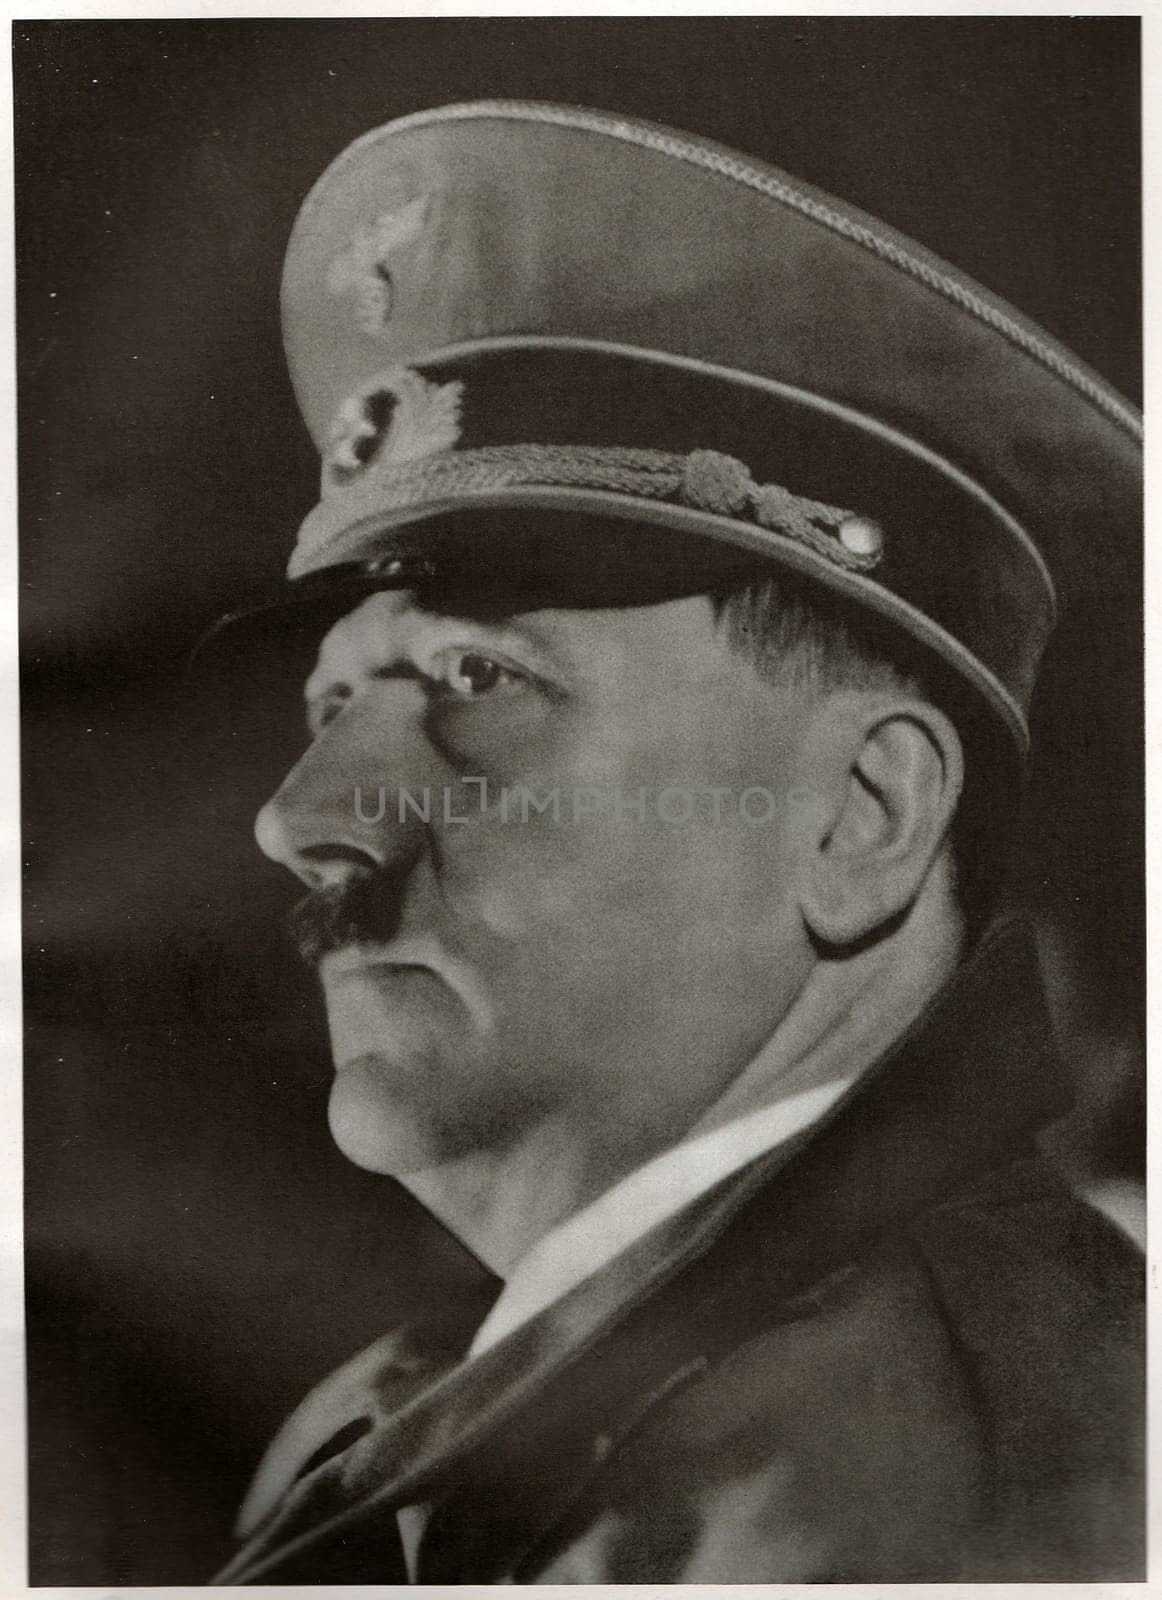 LINZ, AUSTRIA - MARCH 12, 1938: Hitler declares Germany and Austria (Ostmark) united as one entity, the beginning of the GroÃ deutsches Reich (Greater German Empire). Emotional speech from the balcony of the Linz town hall. Reproduction of antique photo.